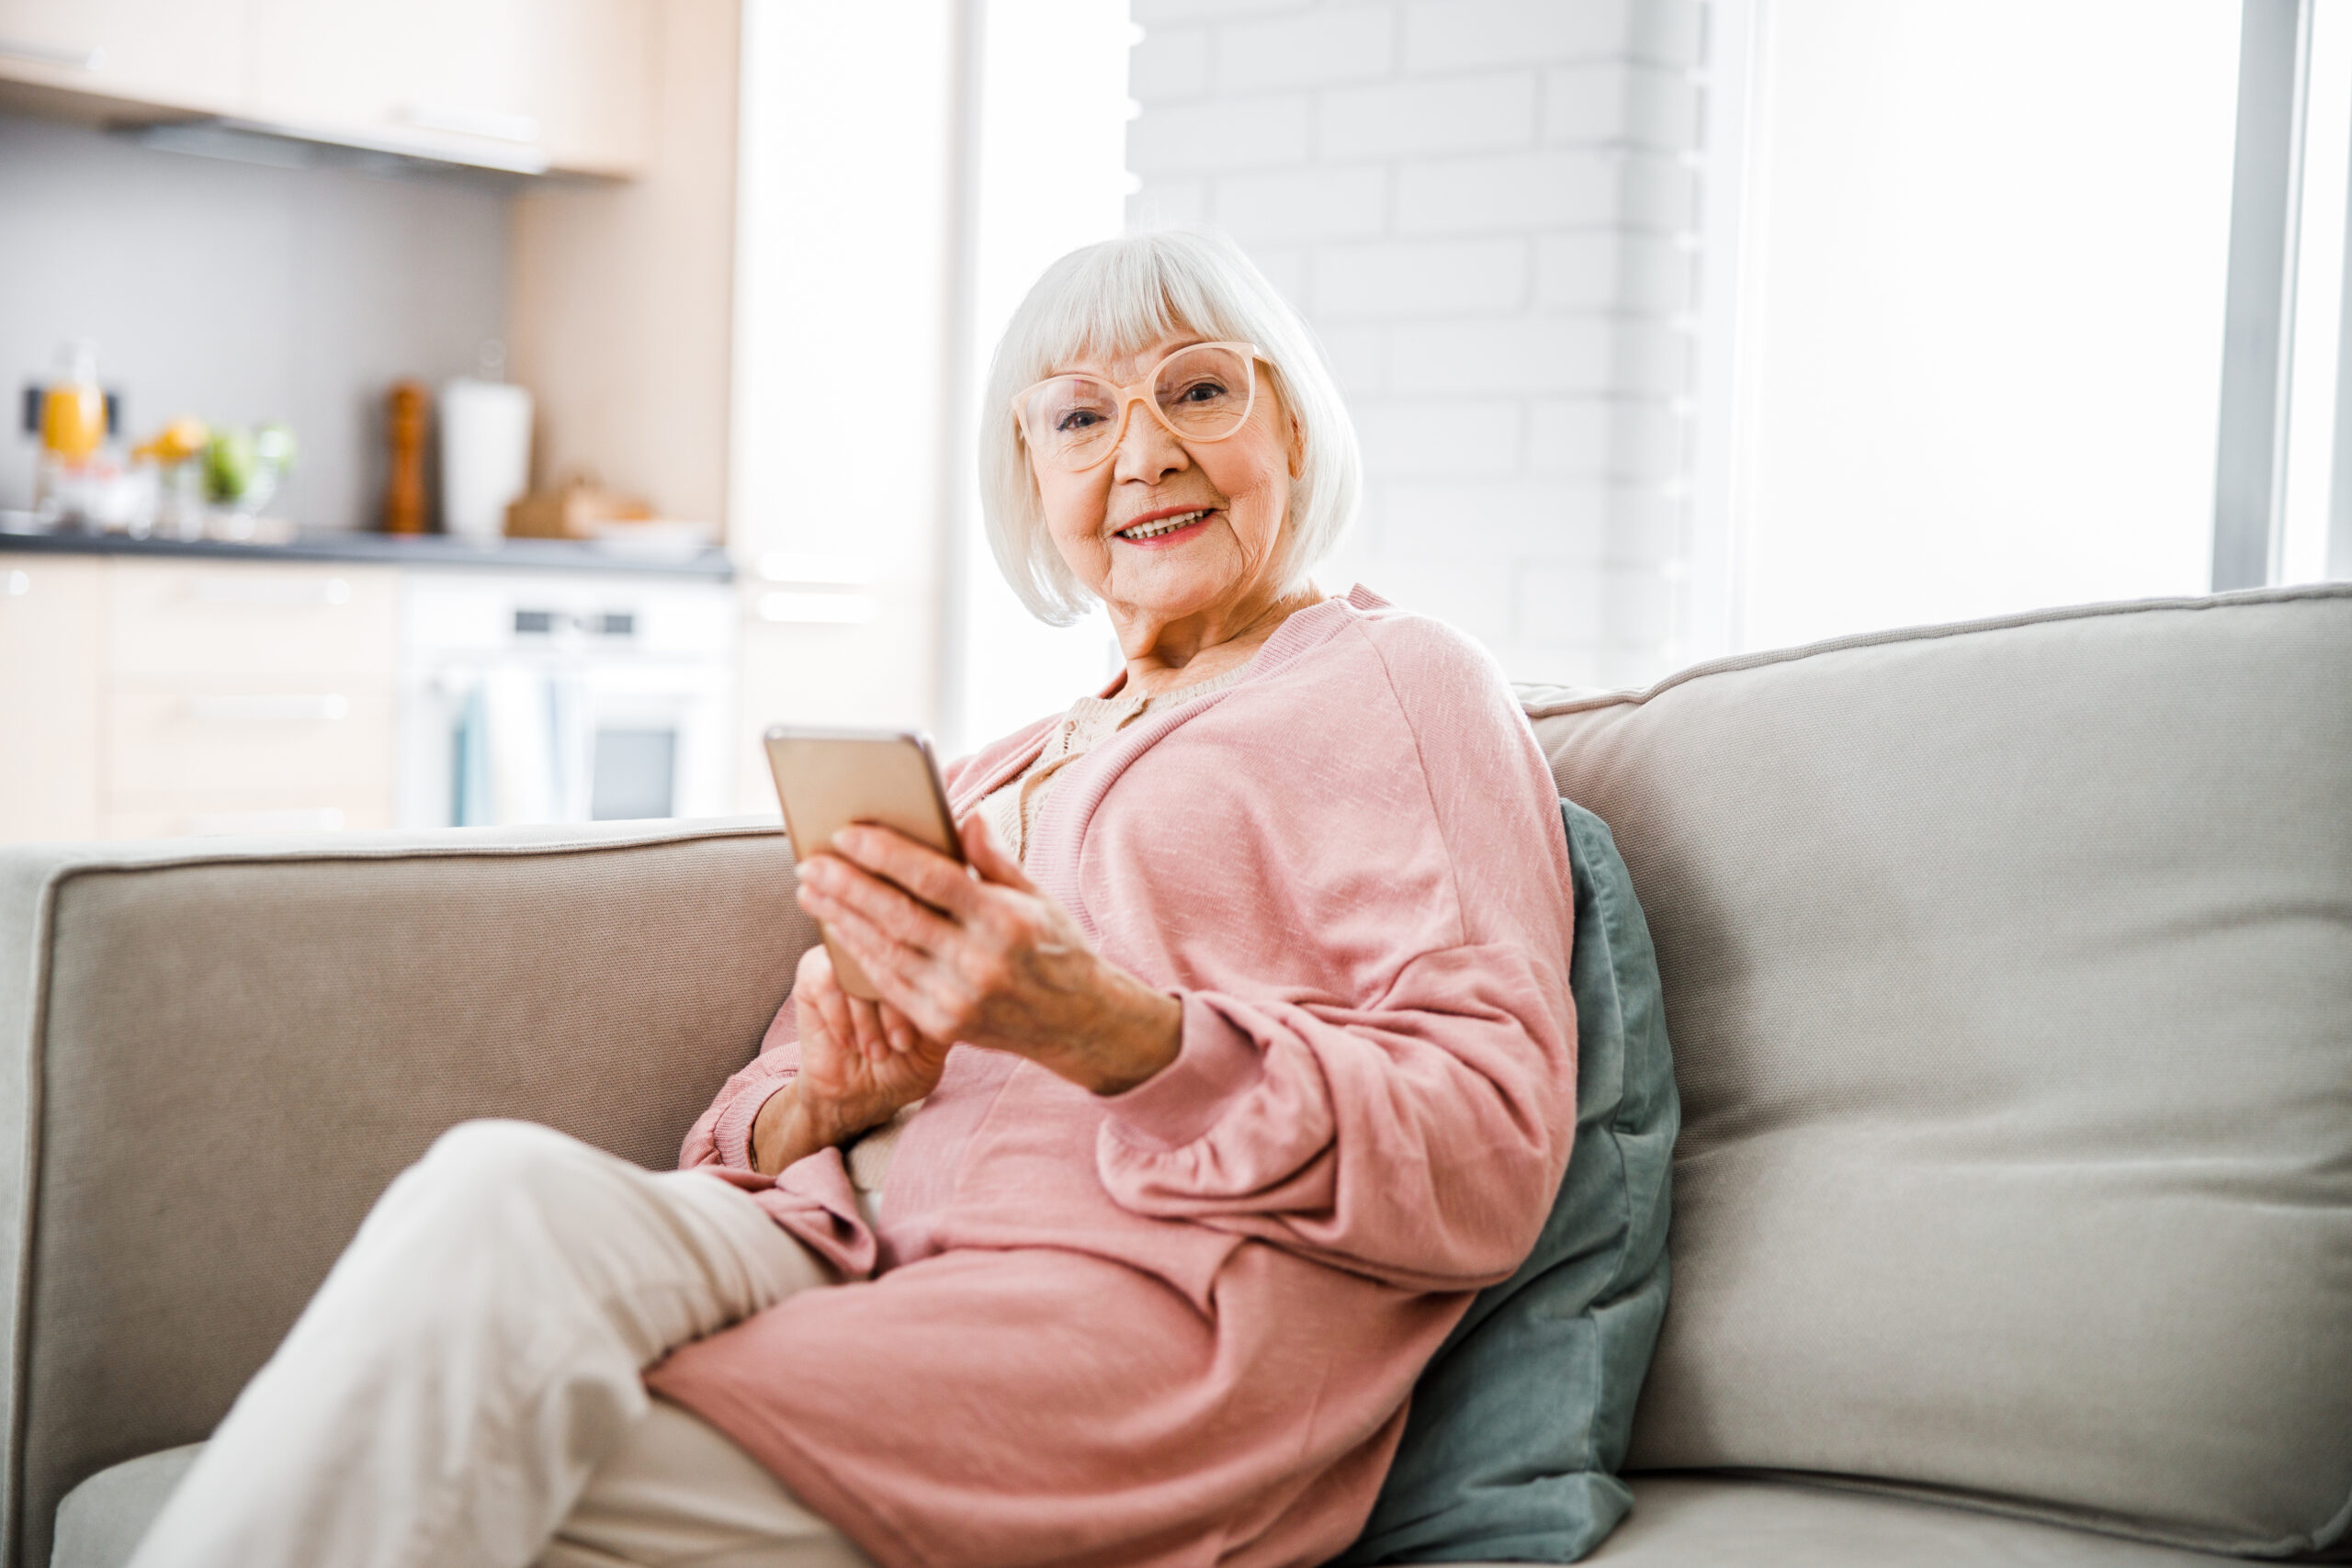 Smiling old lady sitting on couch and holding smartphone